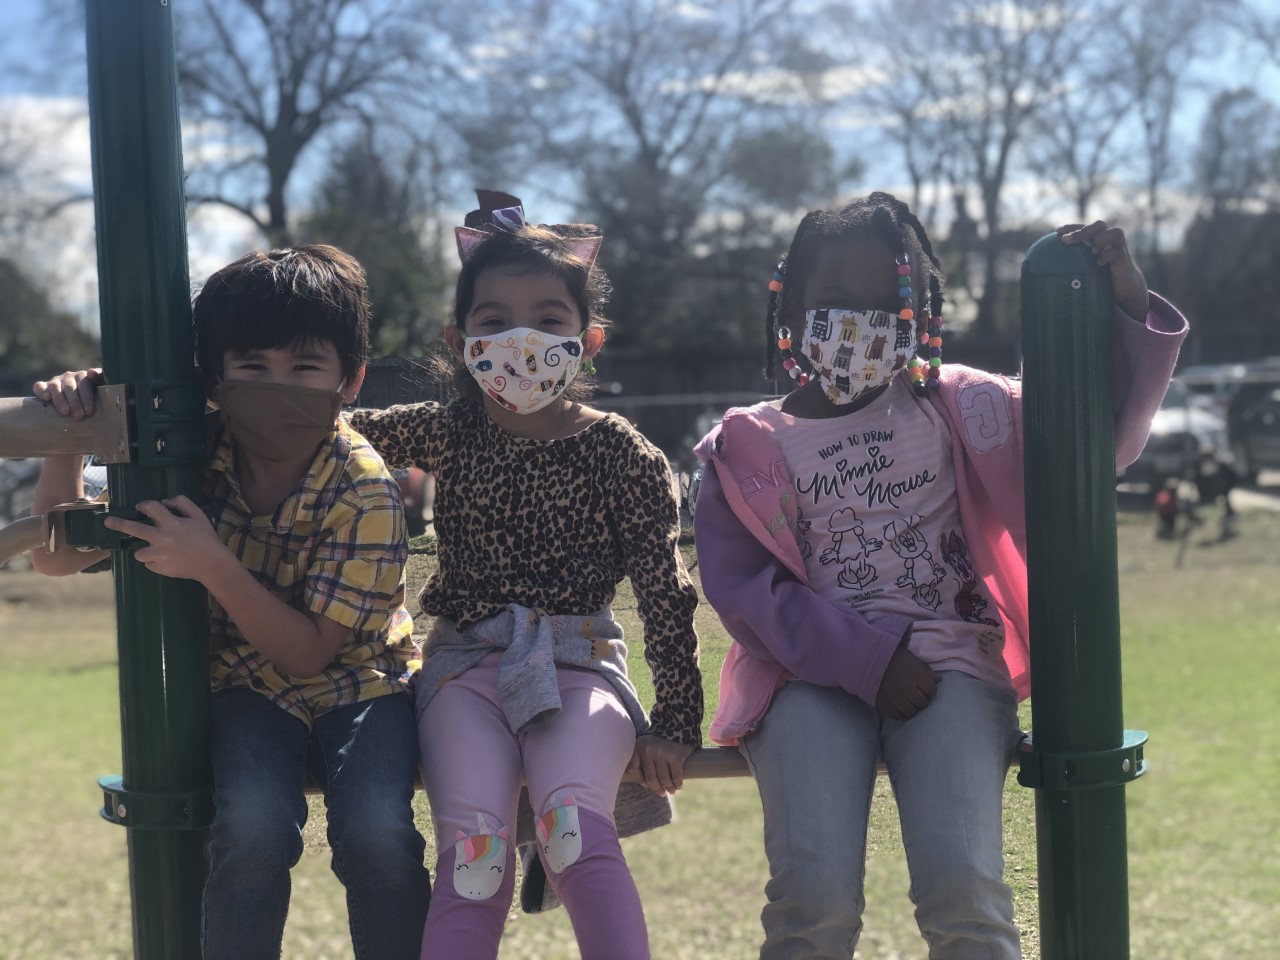 Students smile for the camera while at recess.